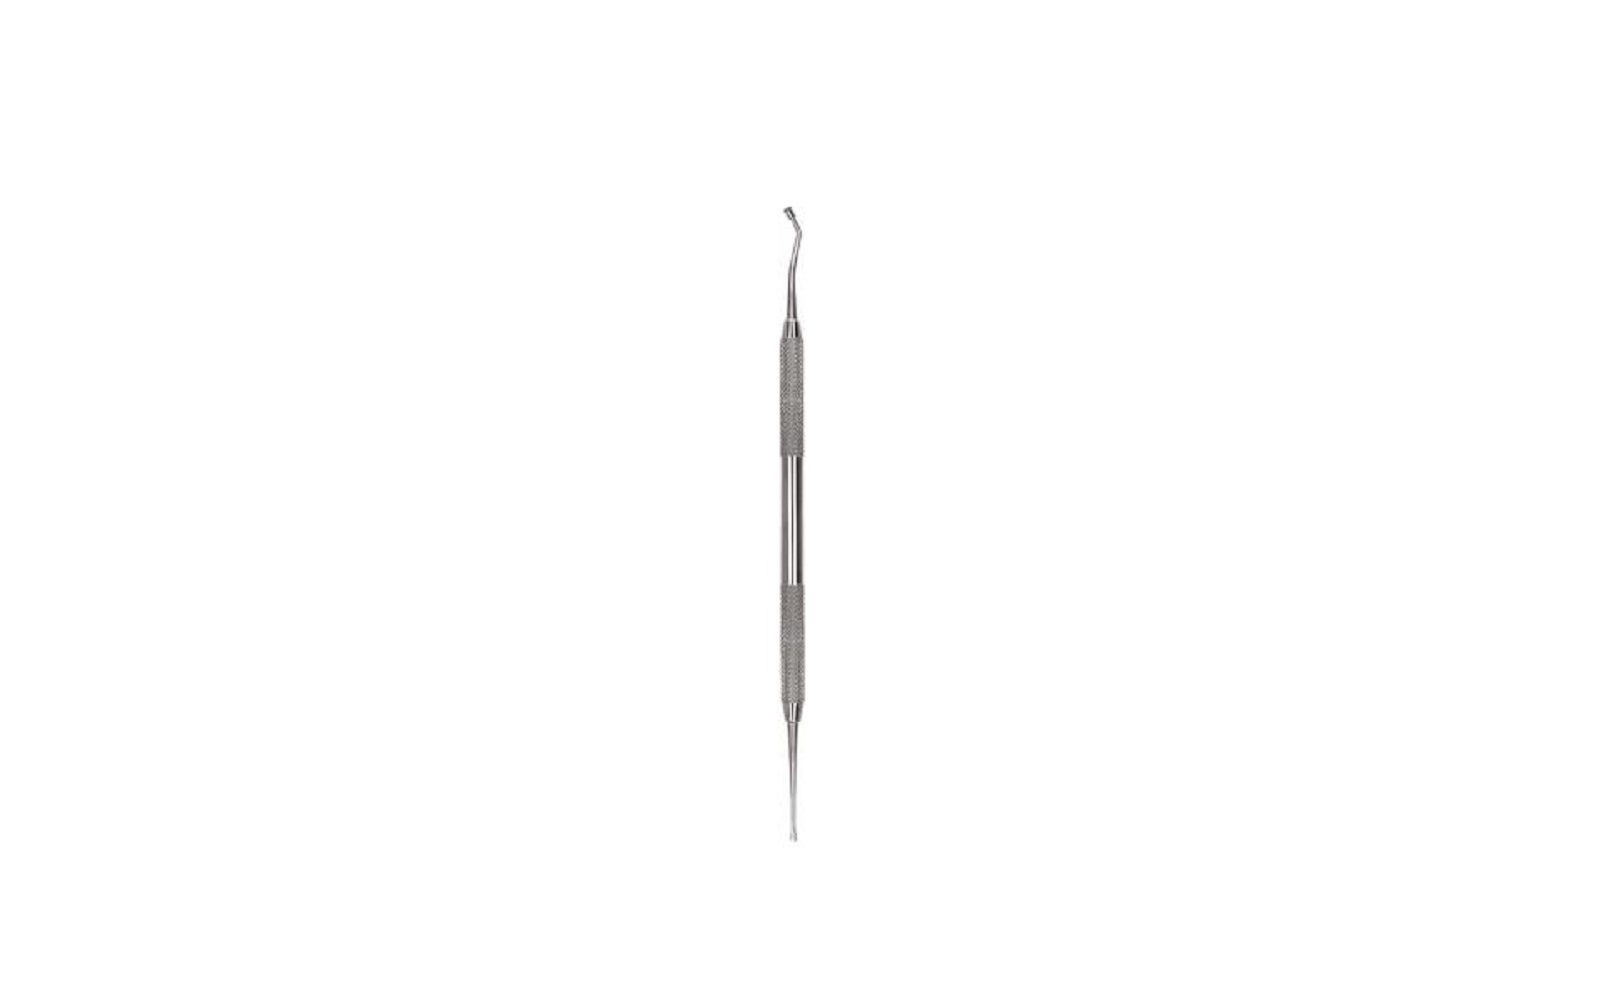 Orthodontic ligature director plugger, double end